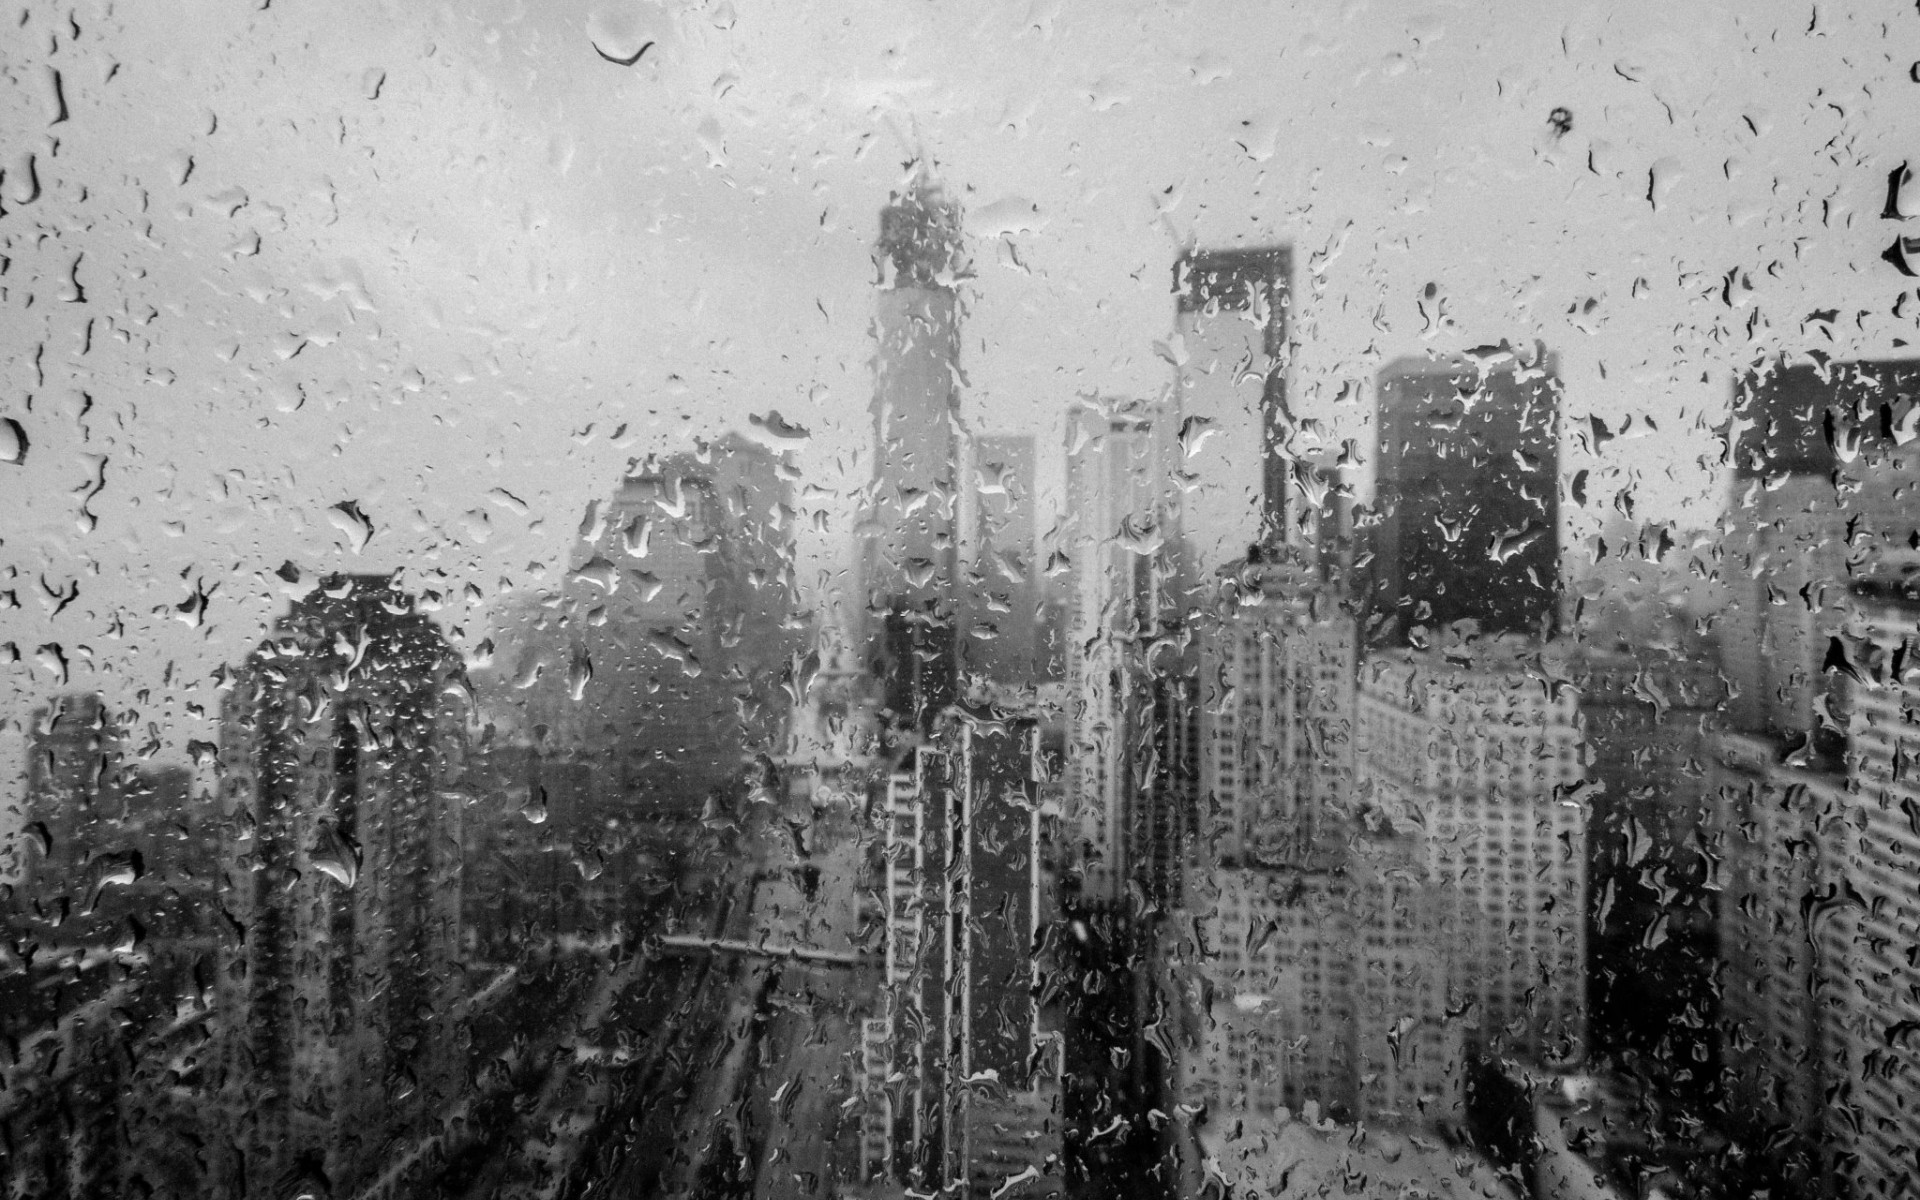 huricane, Sandy, New, York, World, Architercture, Buildings, Skyscrapers, Rain, Storm, Black, White, Disaster, Weather, Drops, Water Wallpaper